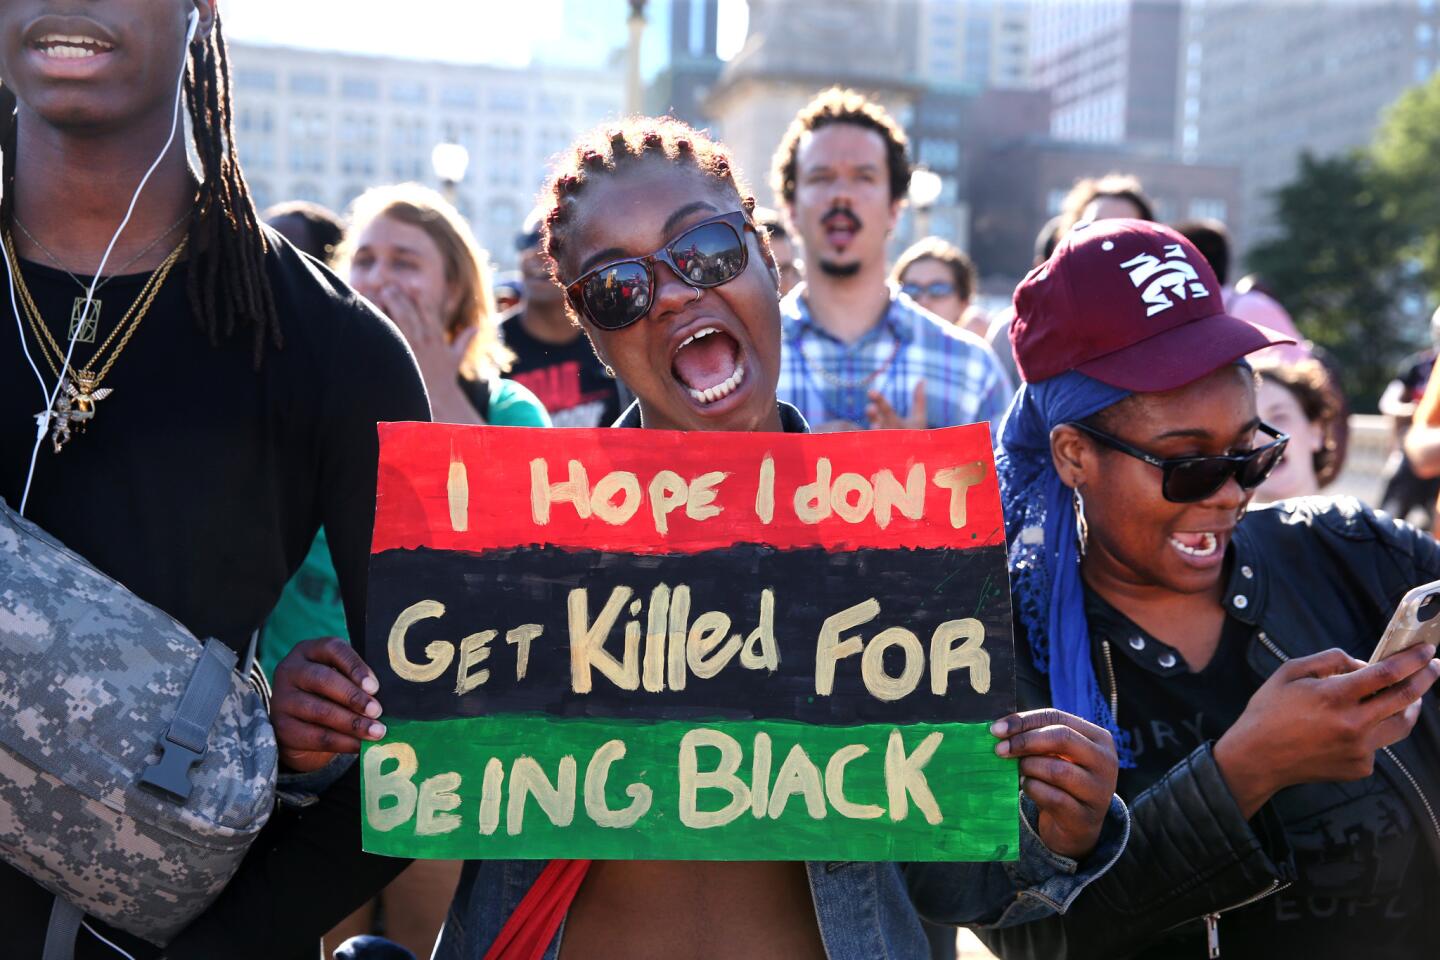 Protests over police shootings